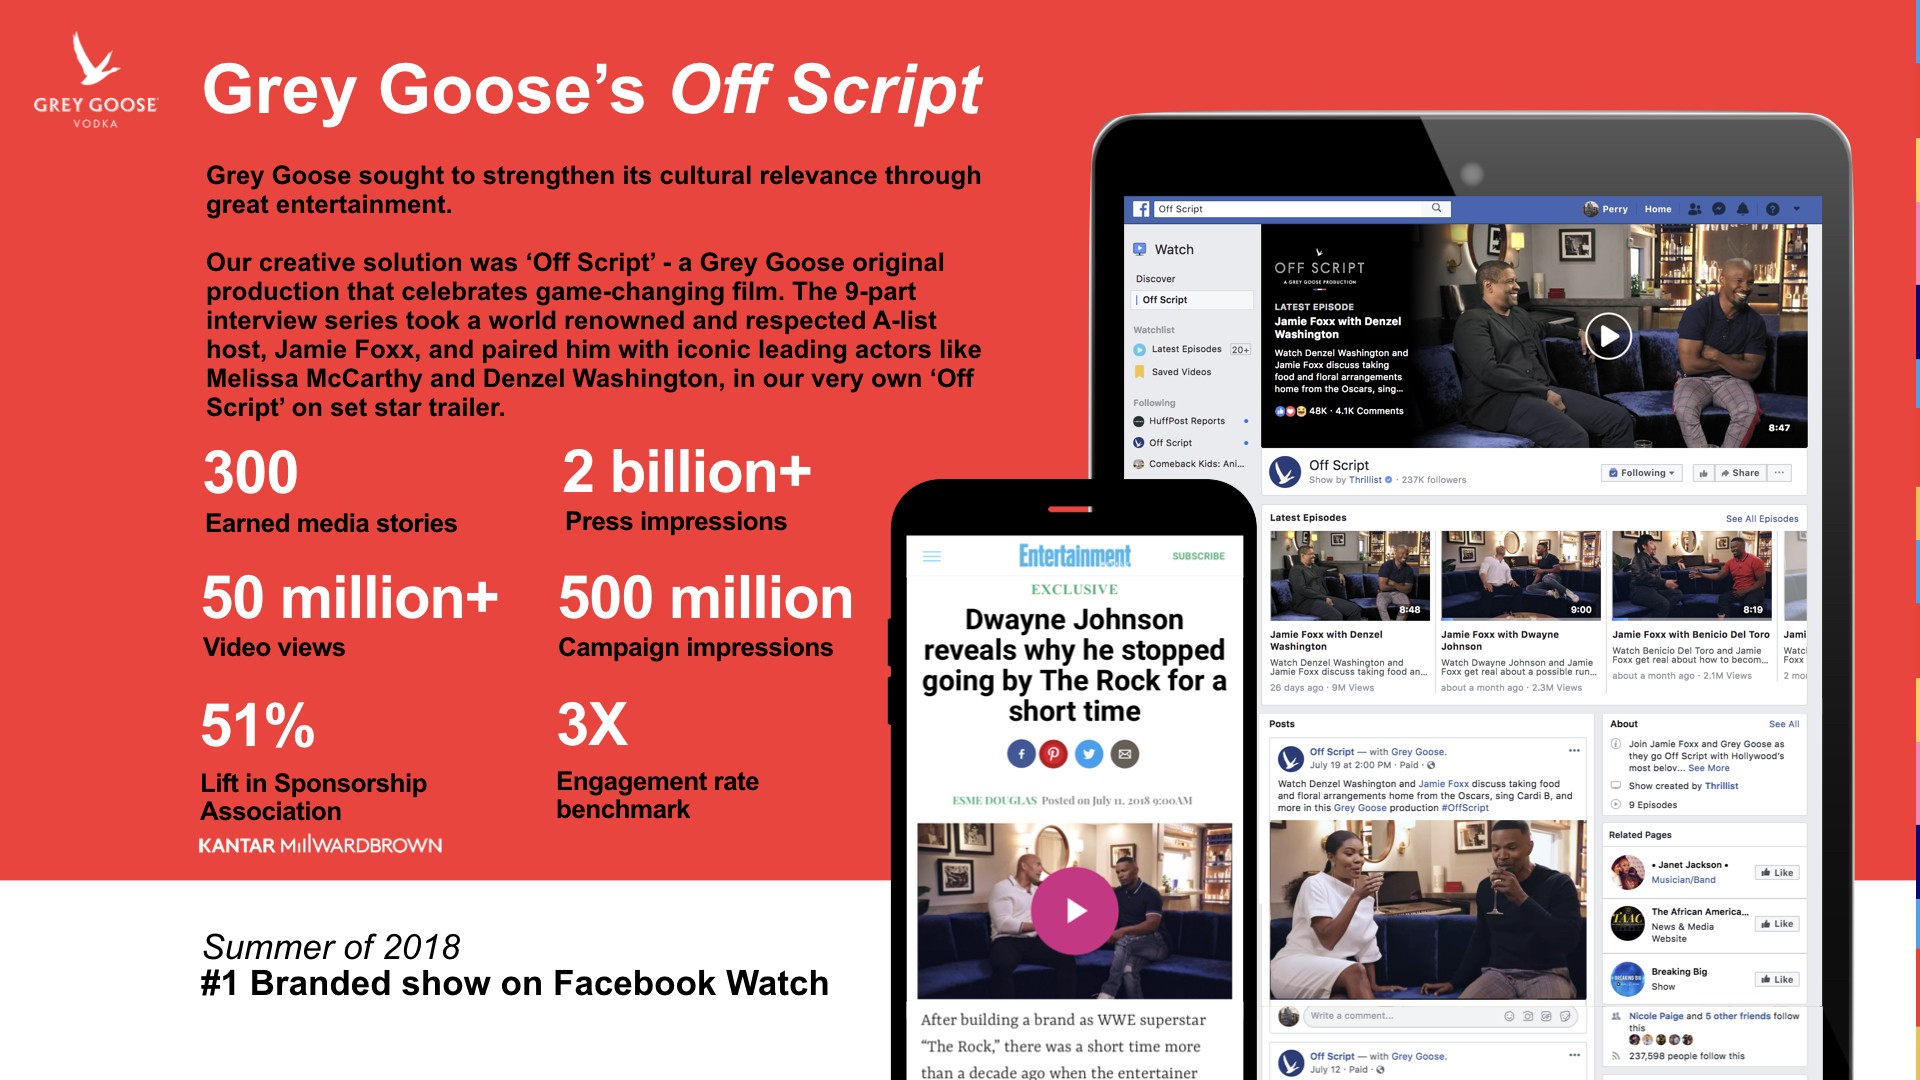 Grey Goose's "Off Script" on Facebook Watch in partnership with Group Nine Media and Sunshine